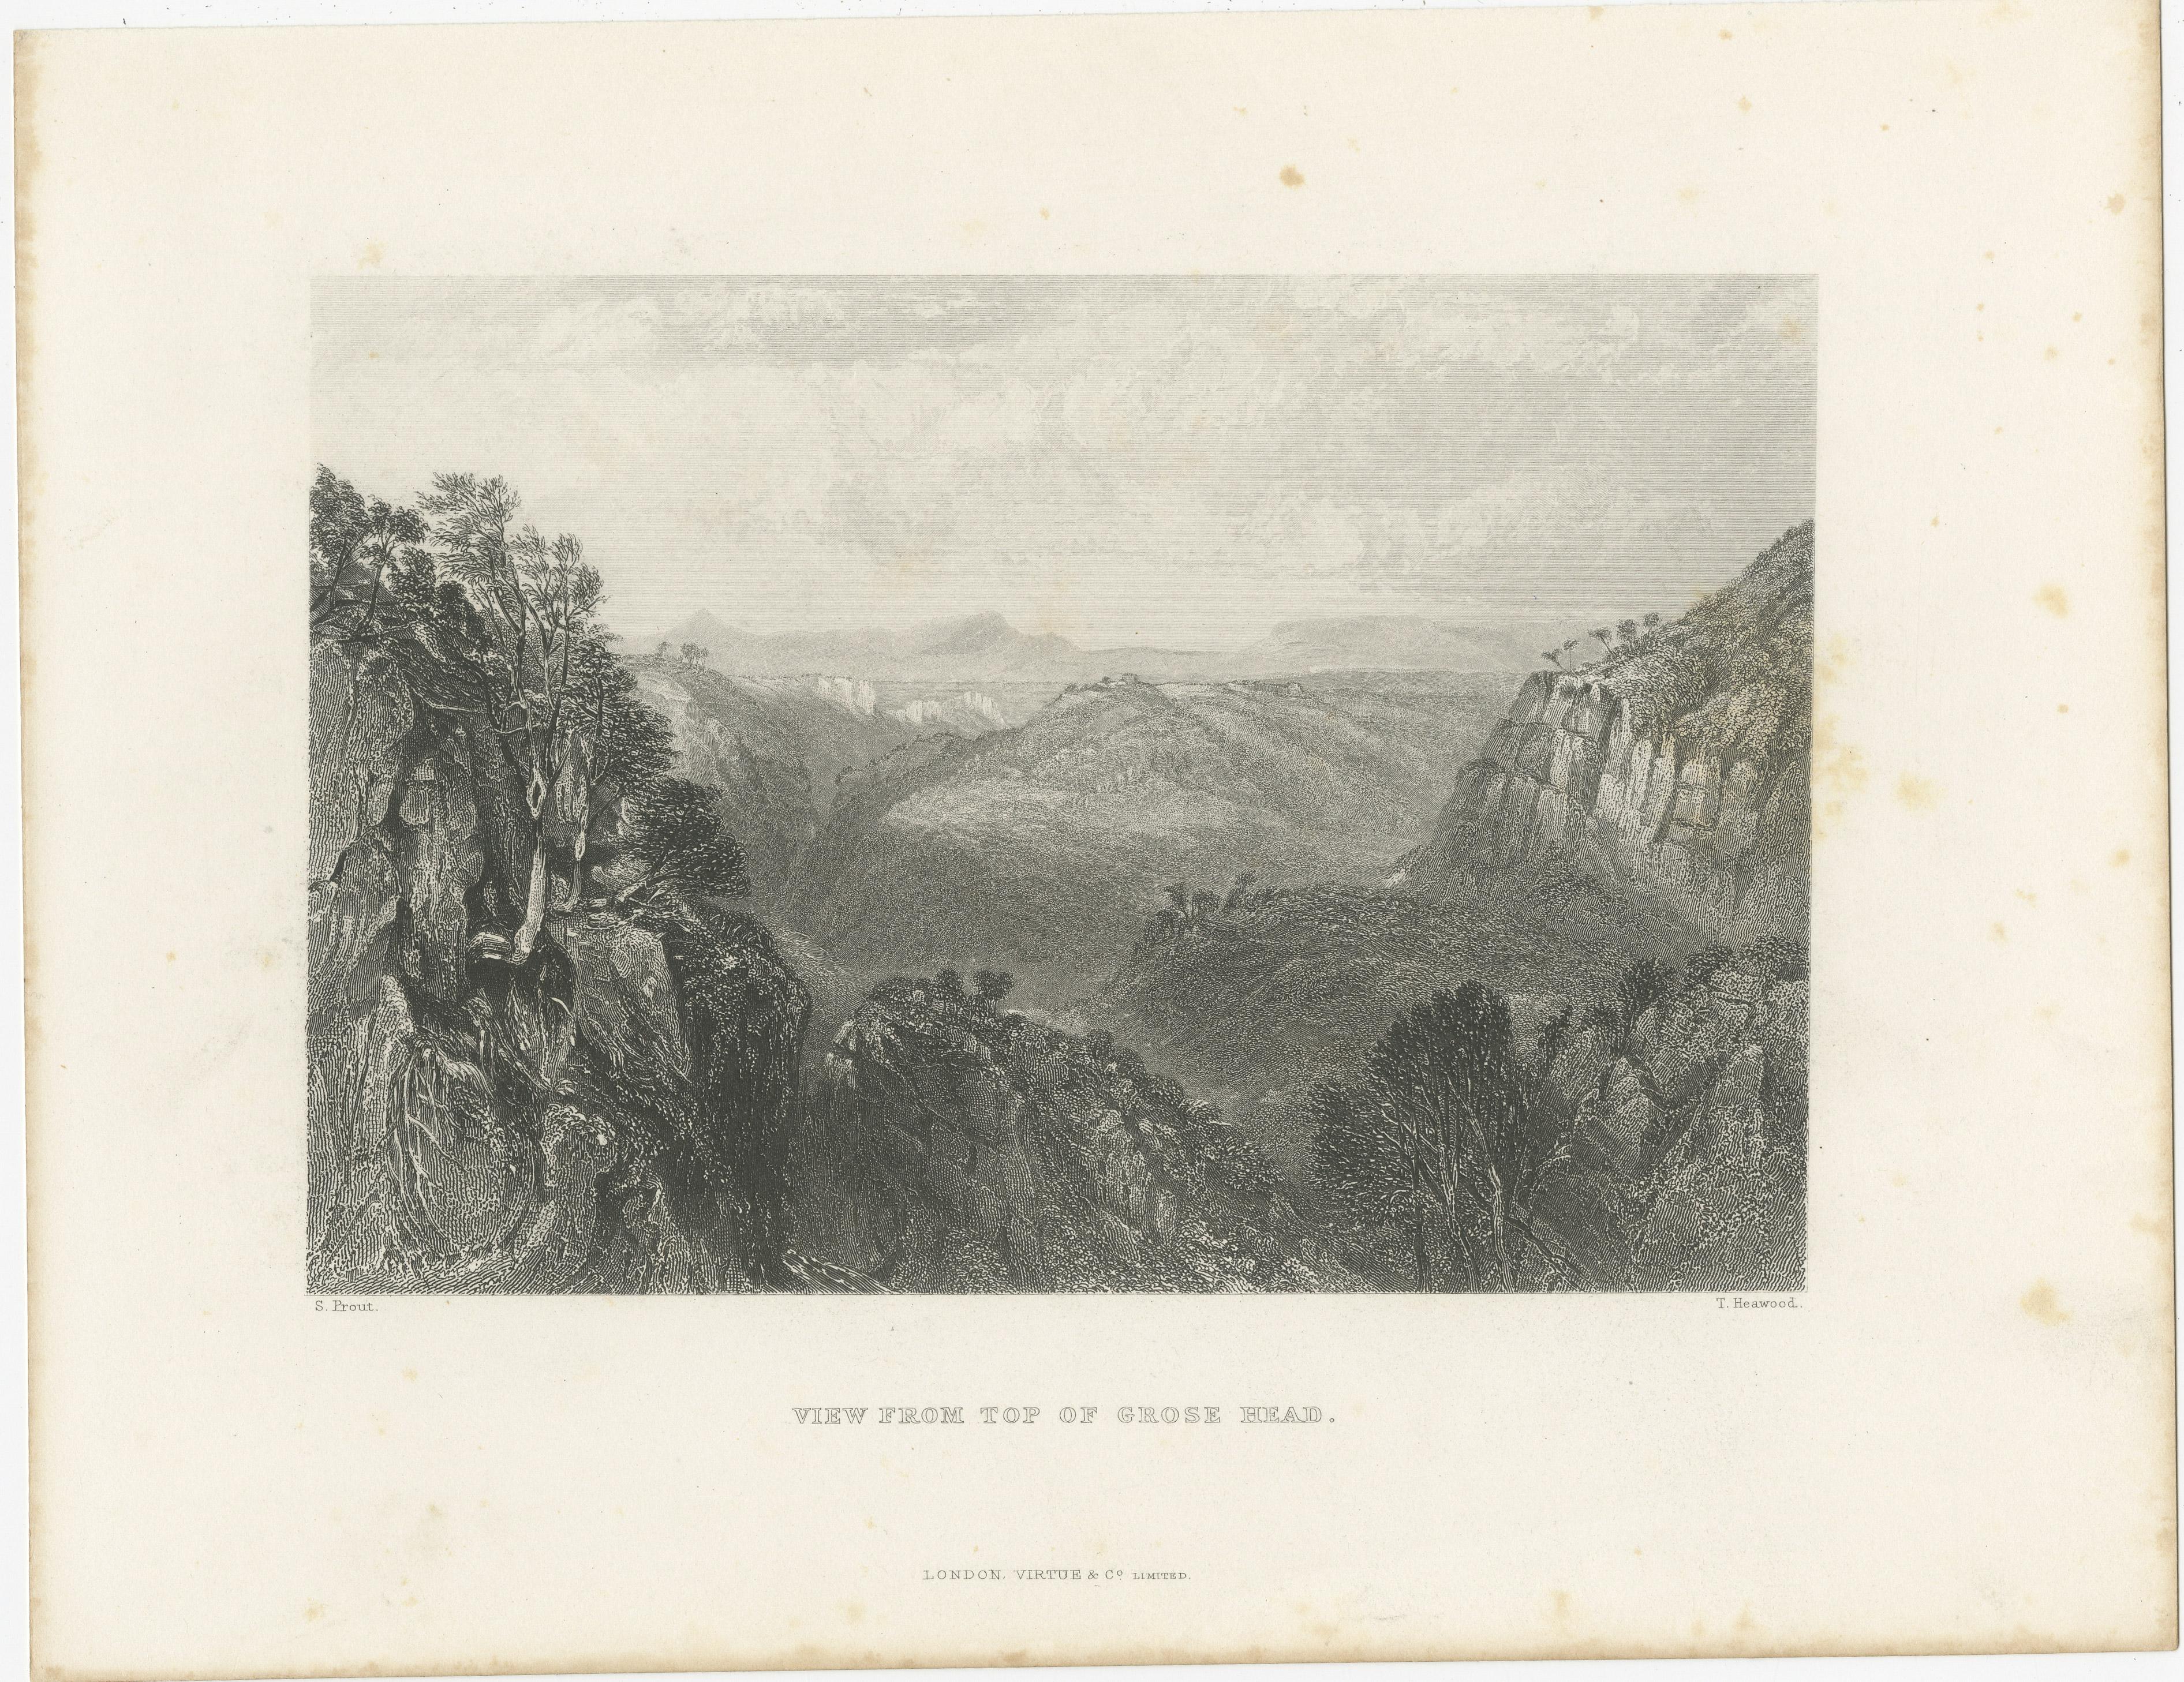 Antique print titled 'View from top of Grose Head'. View of Grose Head, in the Blue Mountains National Park, New South Wales, Australia. Engraved by T. Heawood after S. Prout. Published by Virtue & Co, circa 1875.